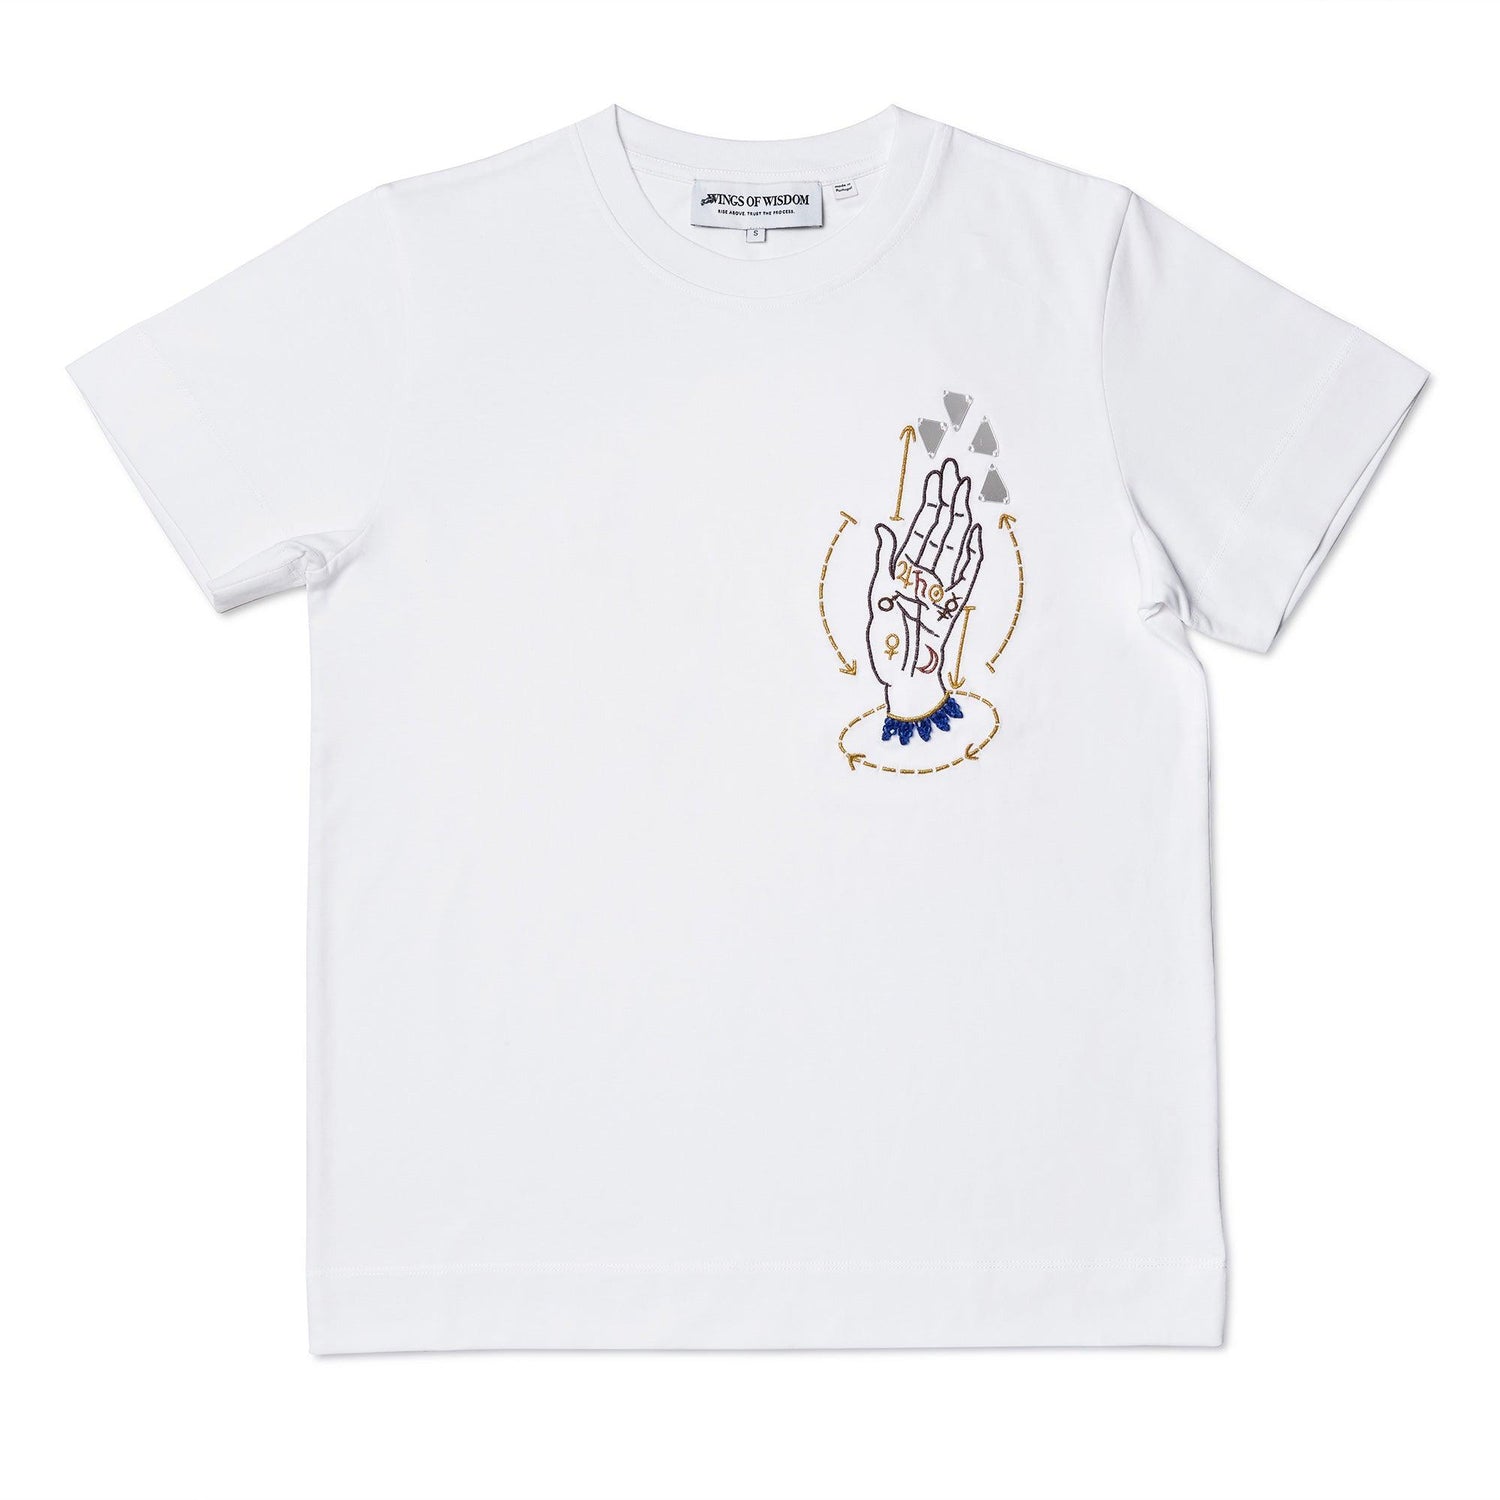 'A Helping Hand' White T-Shirt - Wing of Wisdom